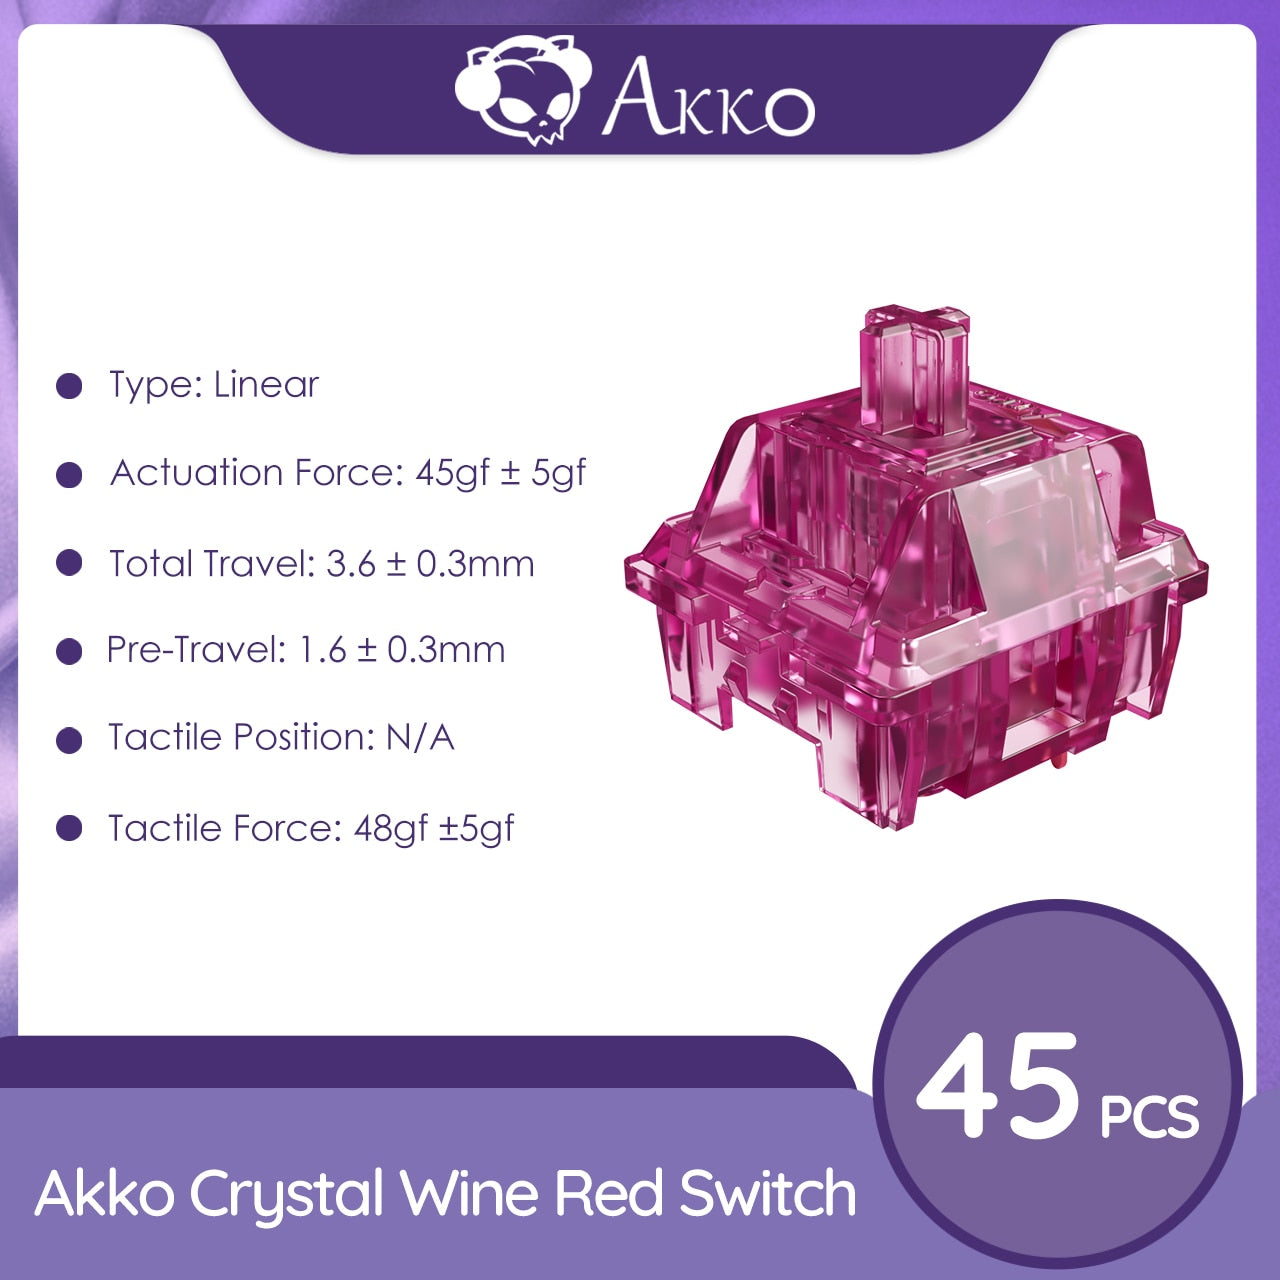 Akko CS Crystal Wine Red Switch  (45 pcs) 3 Pin 45gf Linear Switch Full Polycarbonate Structure Fit for MX Mechanical Keyboard (45 pcs)